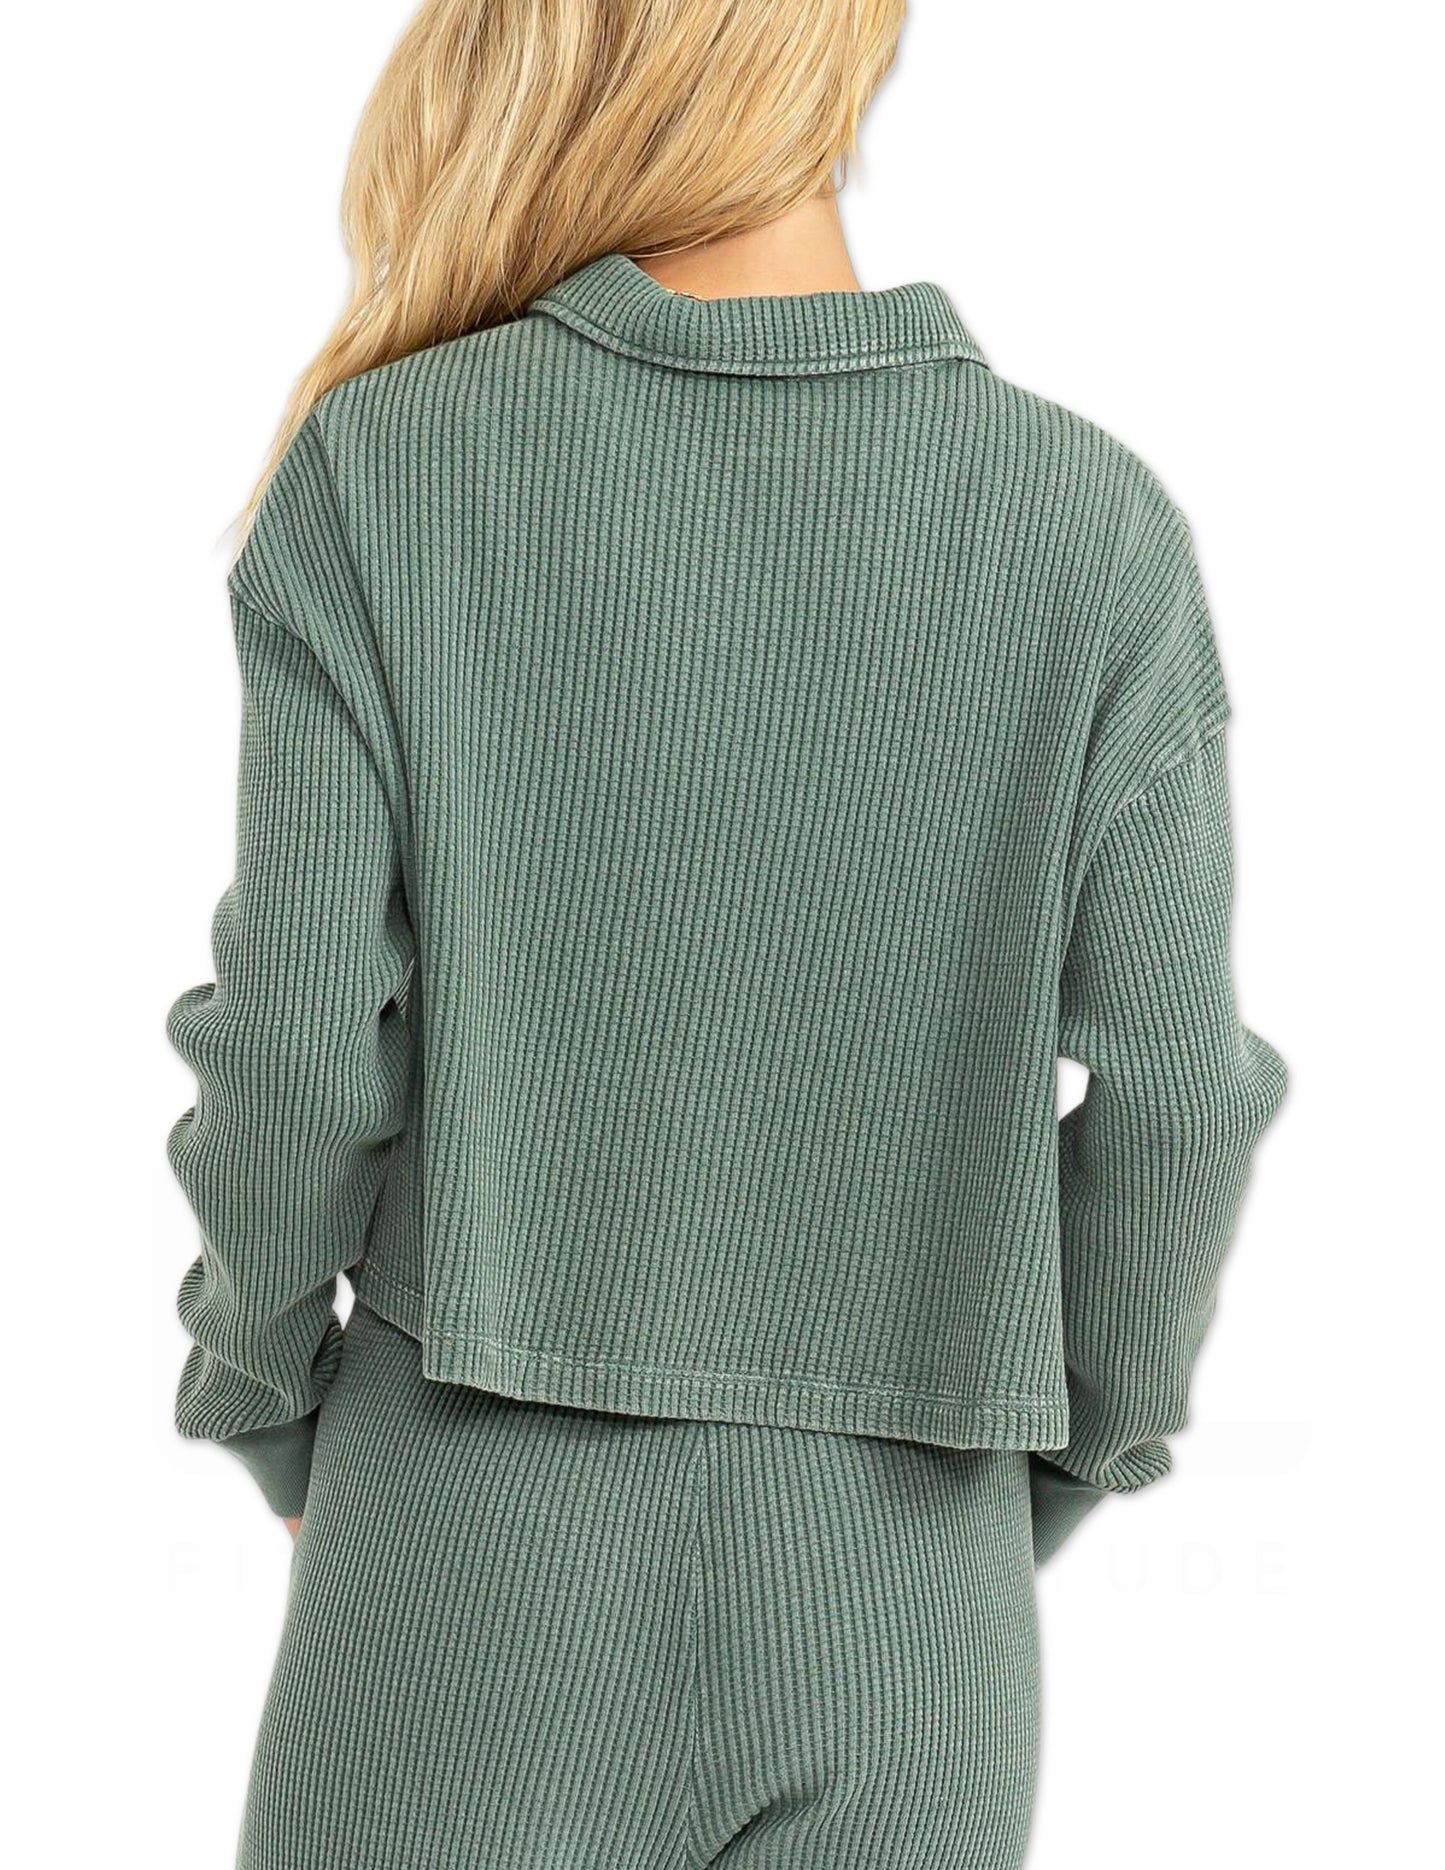 Collared Button Front Top - Grey Green